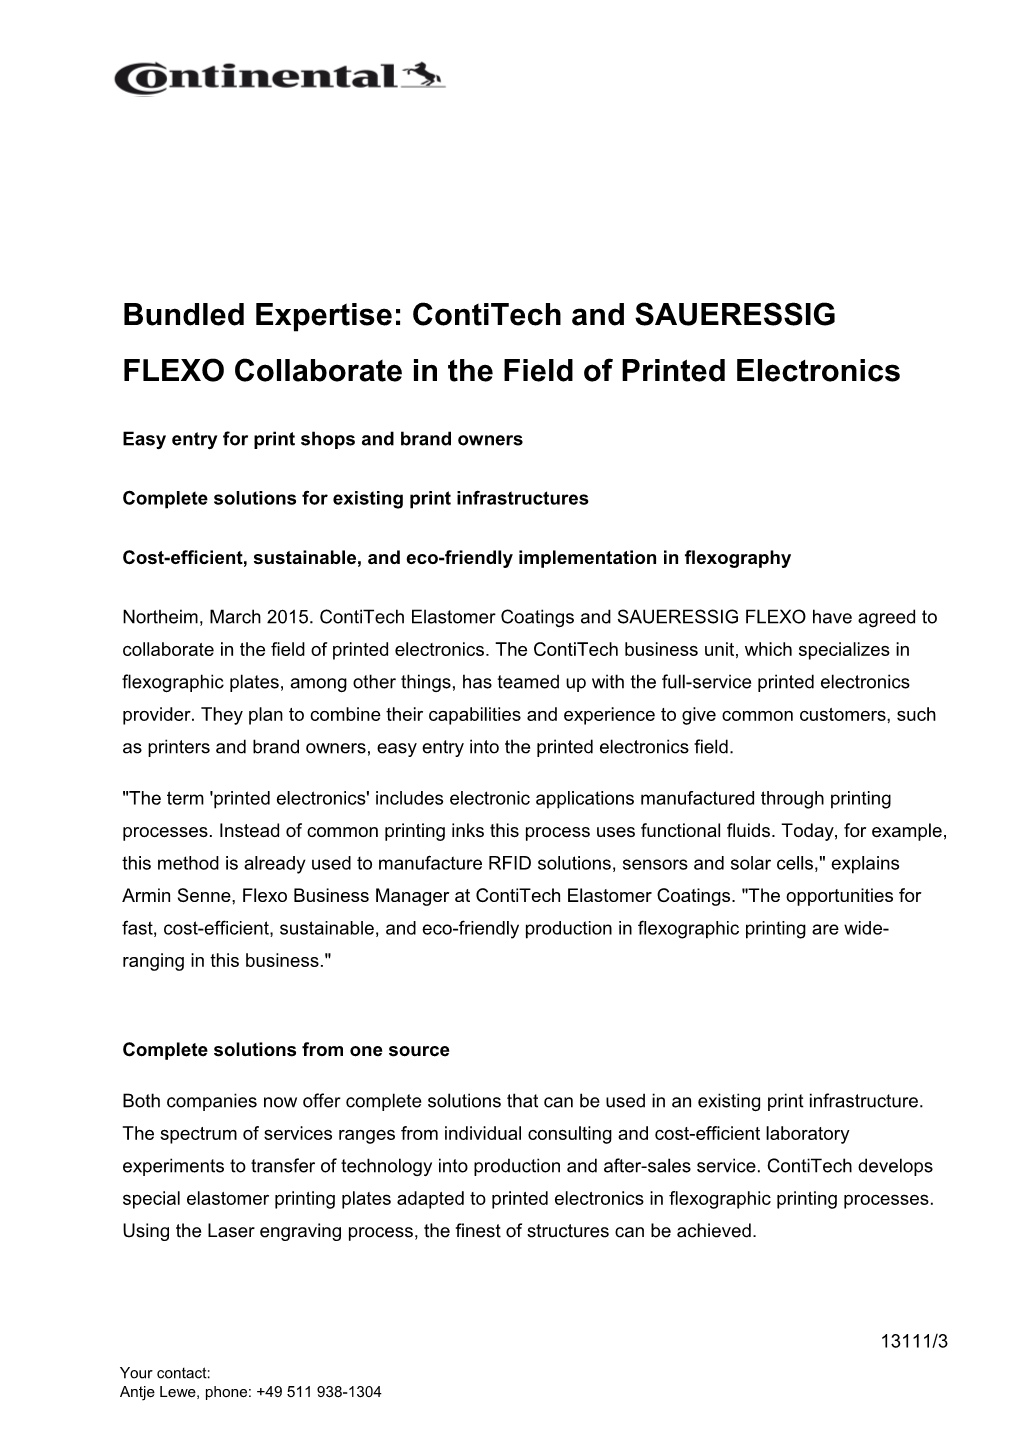 Bundled Expertise: Contitech and SAUERESSIG FLEXO Collaborate in the Field of Printed